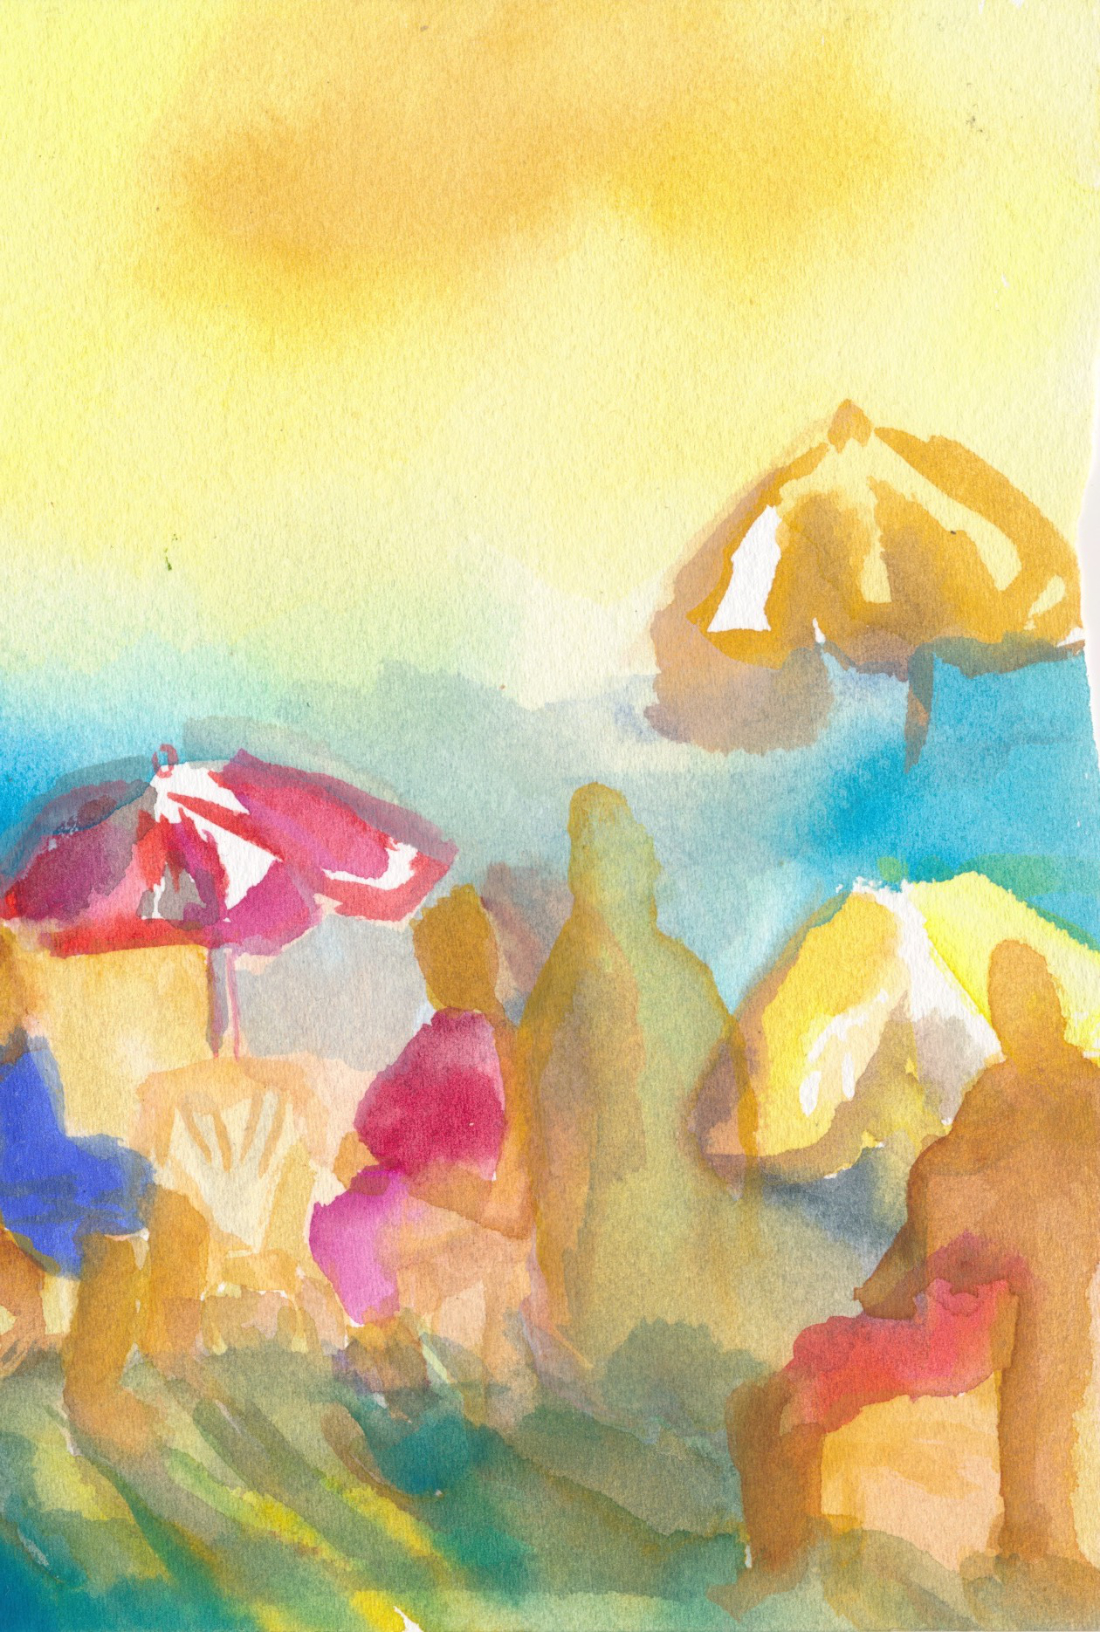 abstract watercolor of a sunny beach with figures and umbrellas